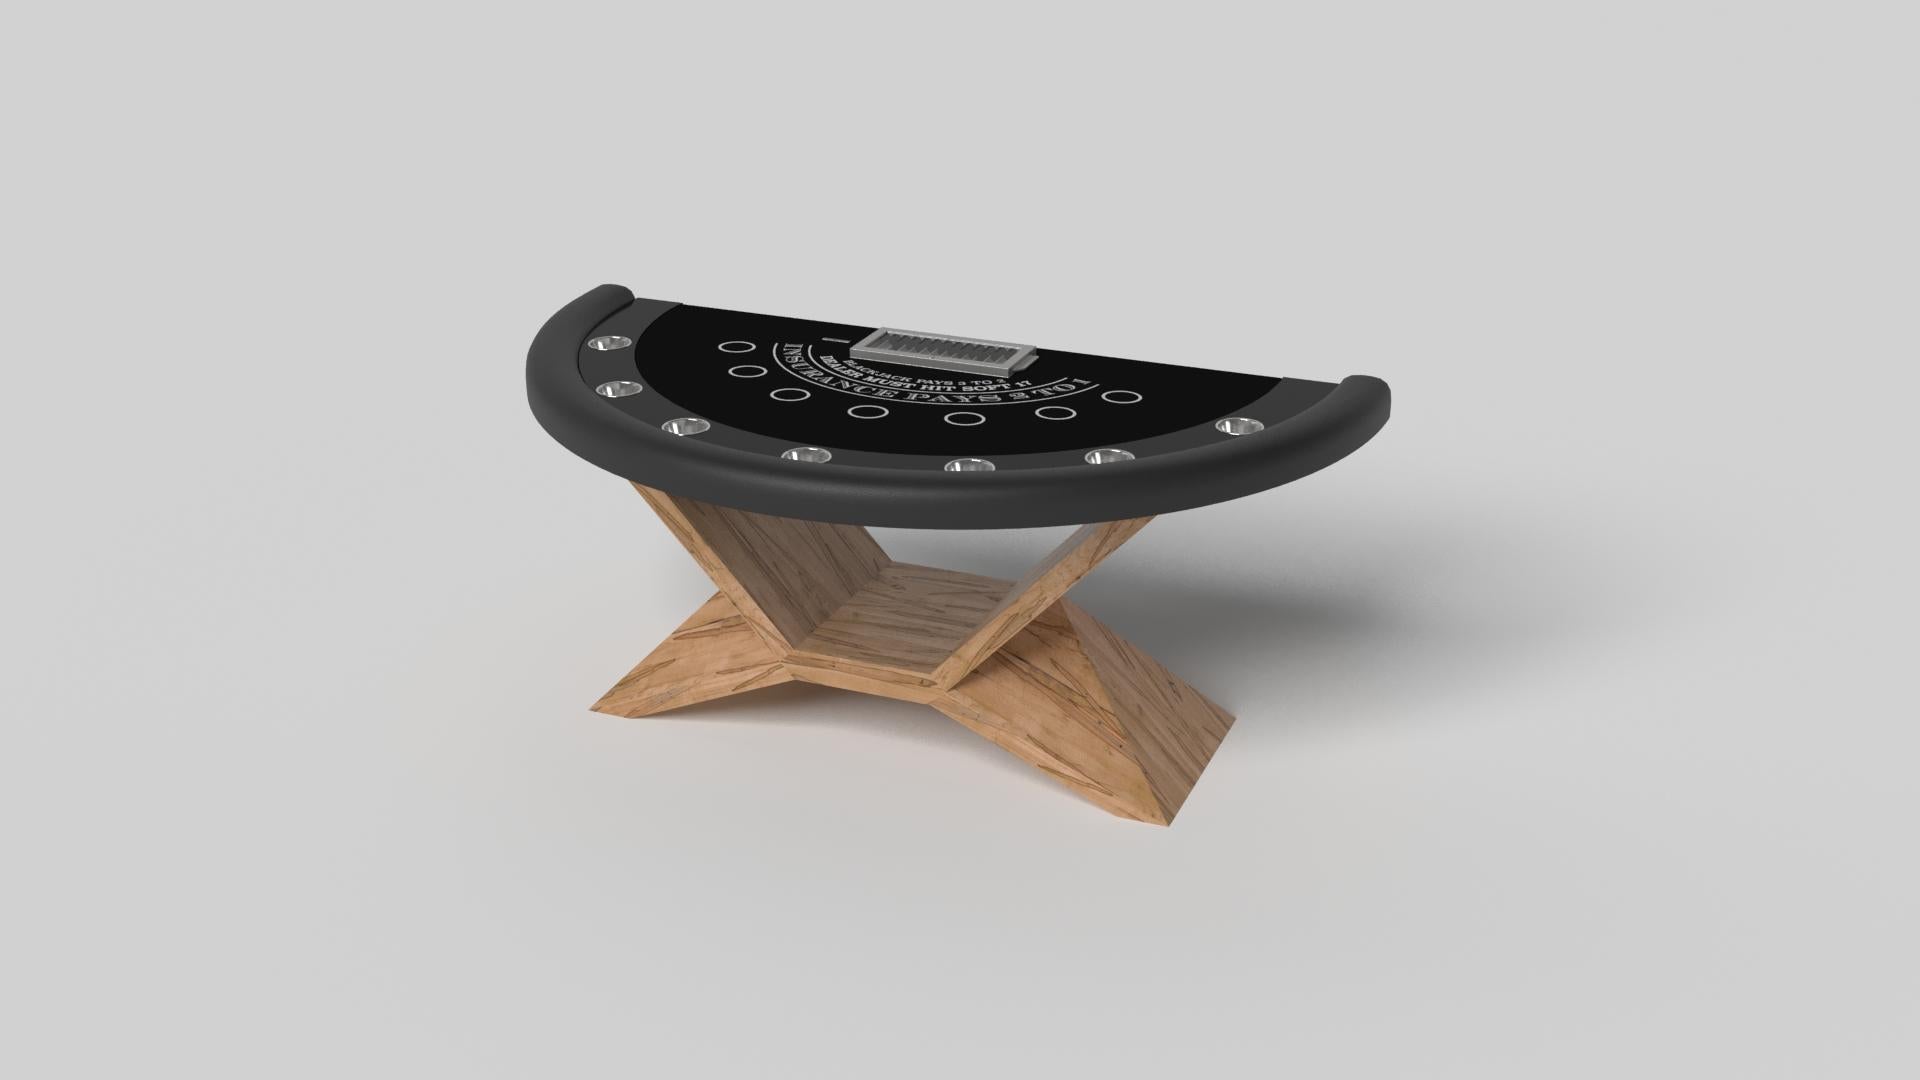 In chrome metal, the Kors blackjack table is a superior example of contrasting geometric forms. This table features an angular base that highlights the beauty of negative space from the front view. From the side view, it offers a completely